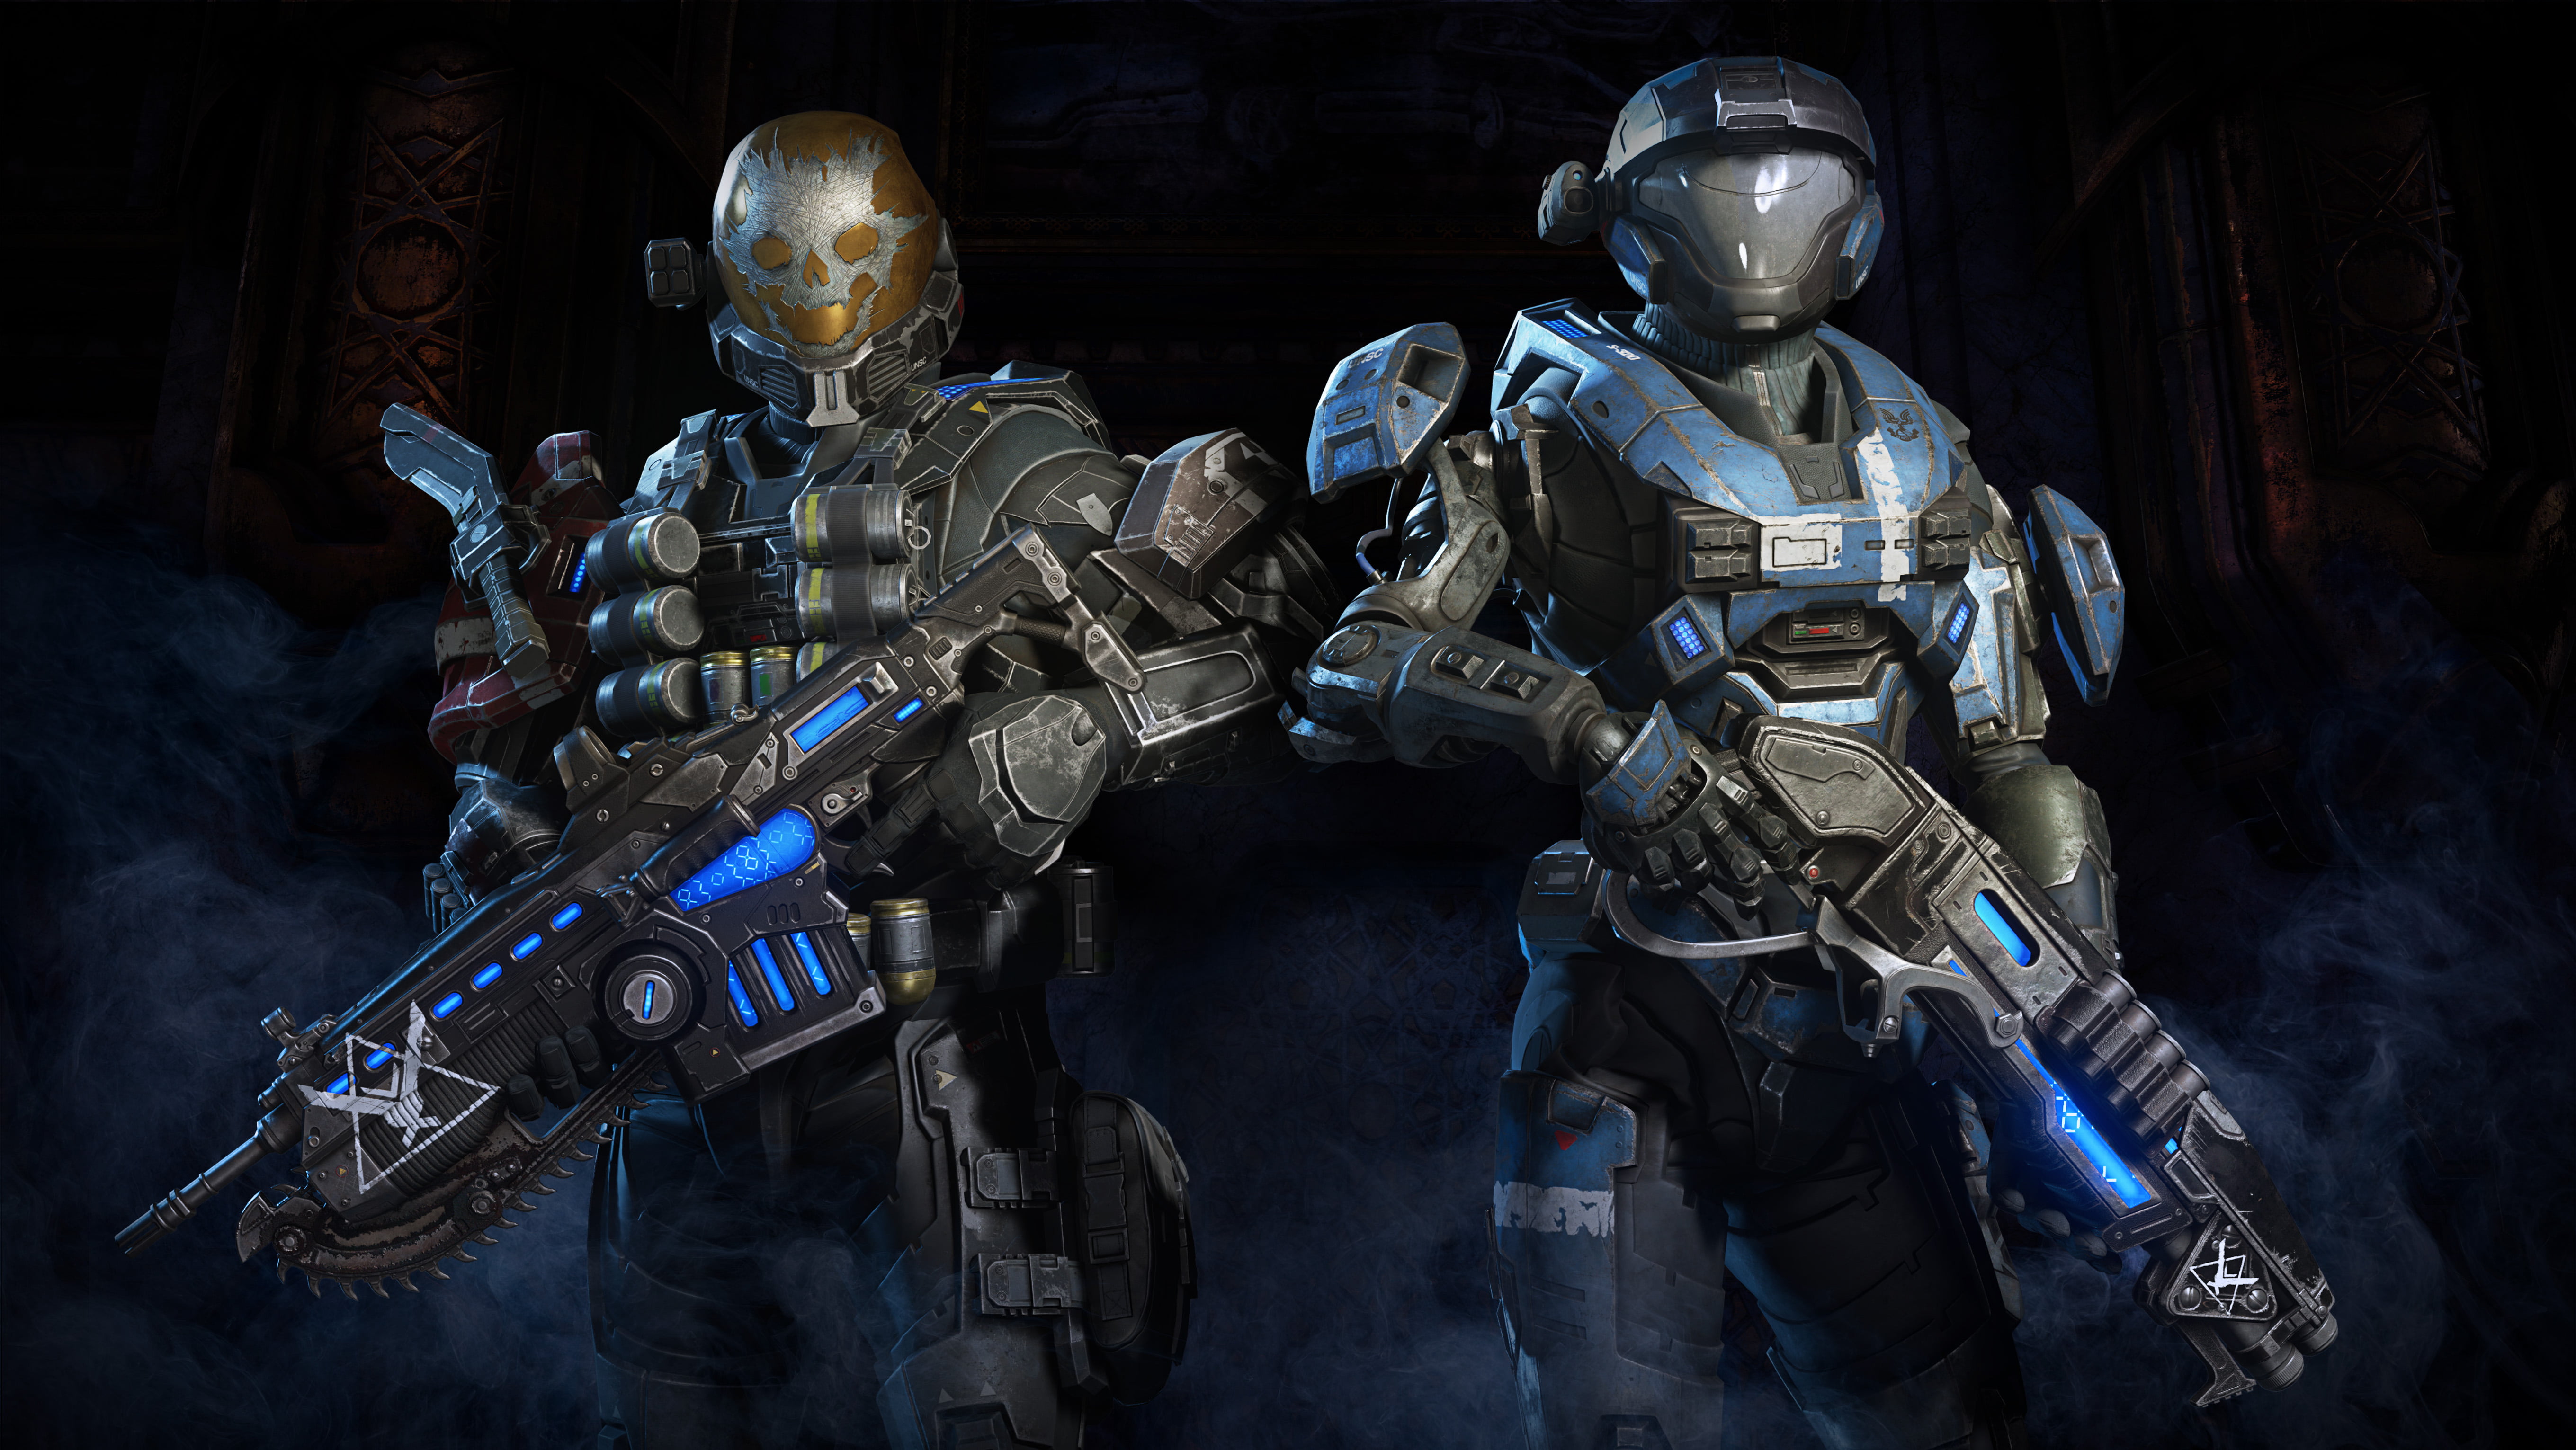 Free Download Hd Wallpaper Video Game Crossover Gears 5 Gears Of War Halo Halo Reach